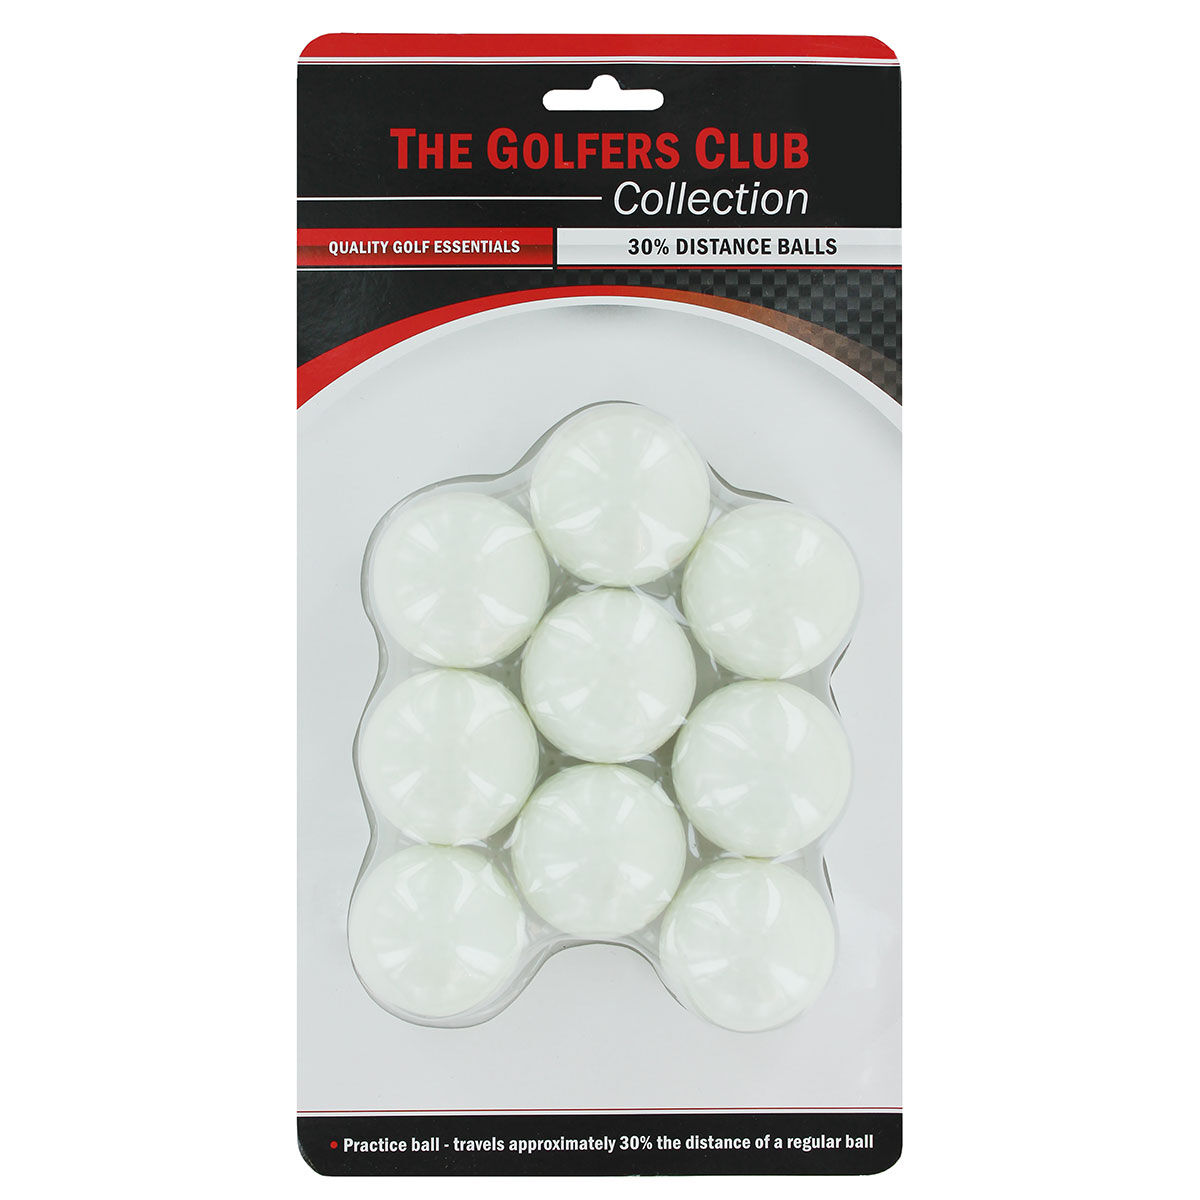 The Golfers Club 30% Distance 9 Golf Ball Pack, Mens, White, One Size | American Golf